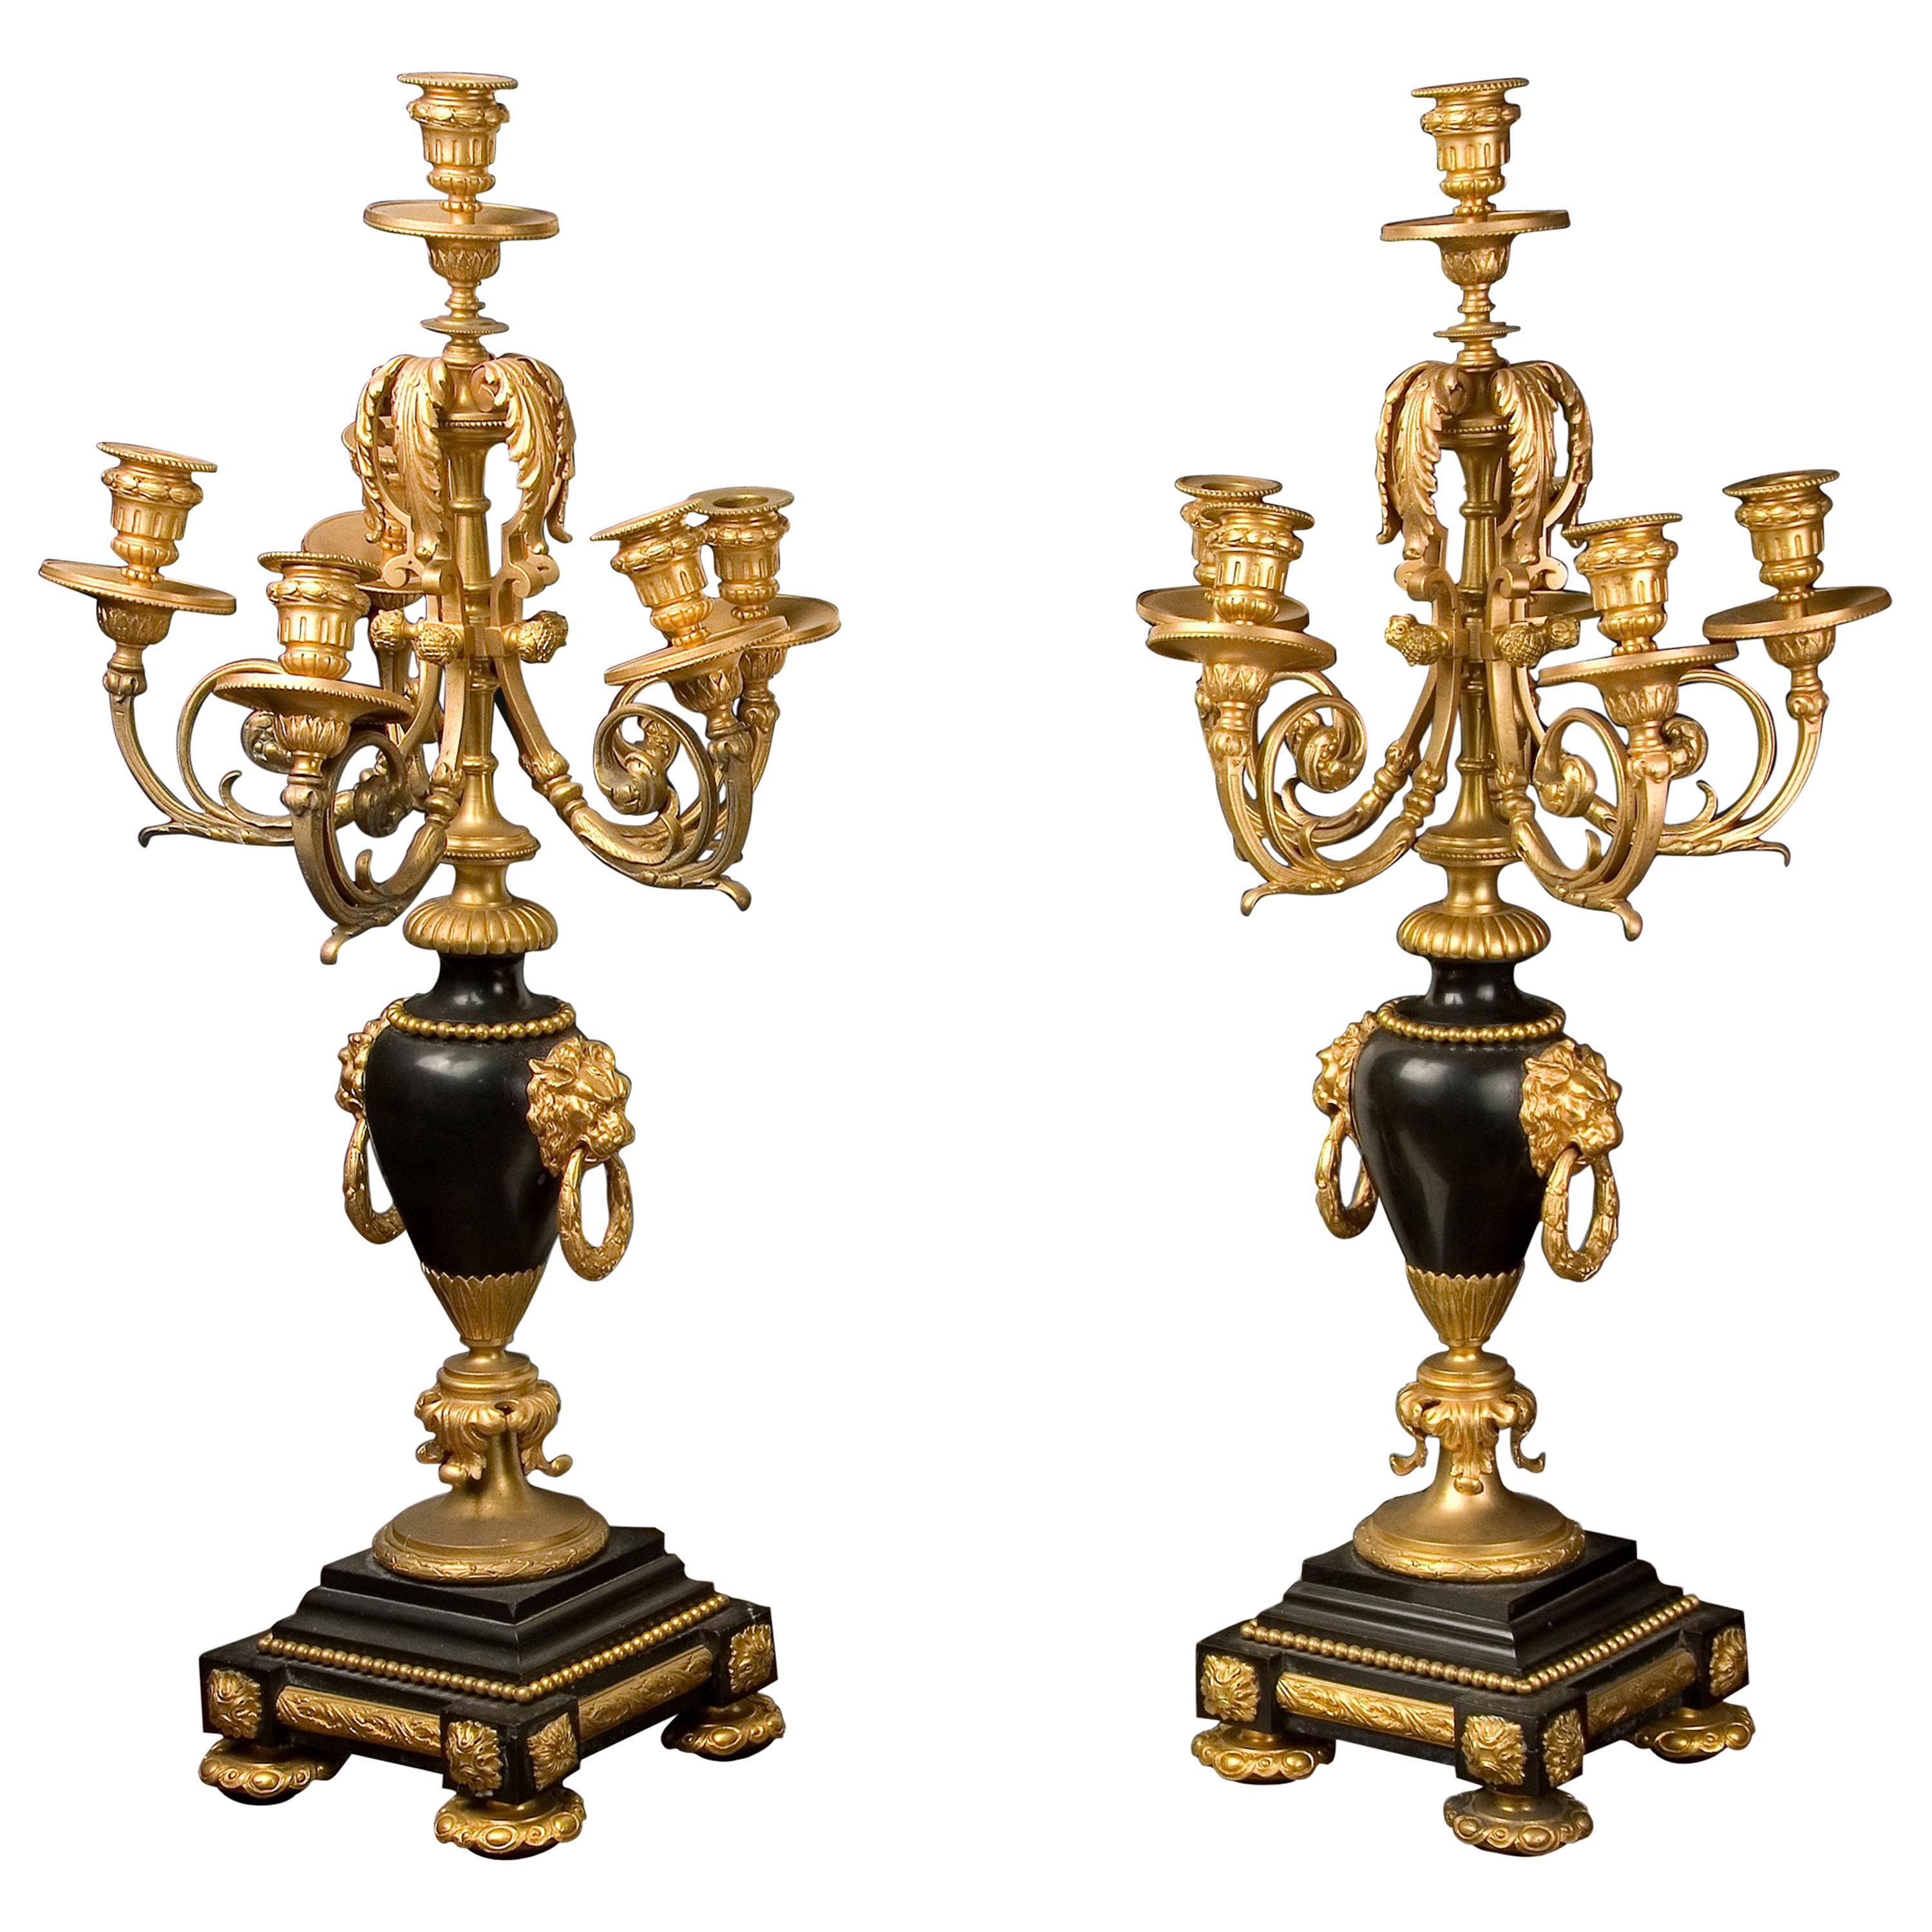 Pair of Candelabras, Belgian Bronze and Marble, 19th Century